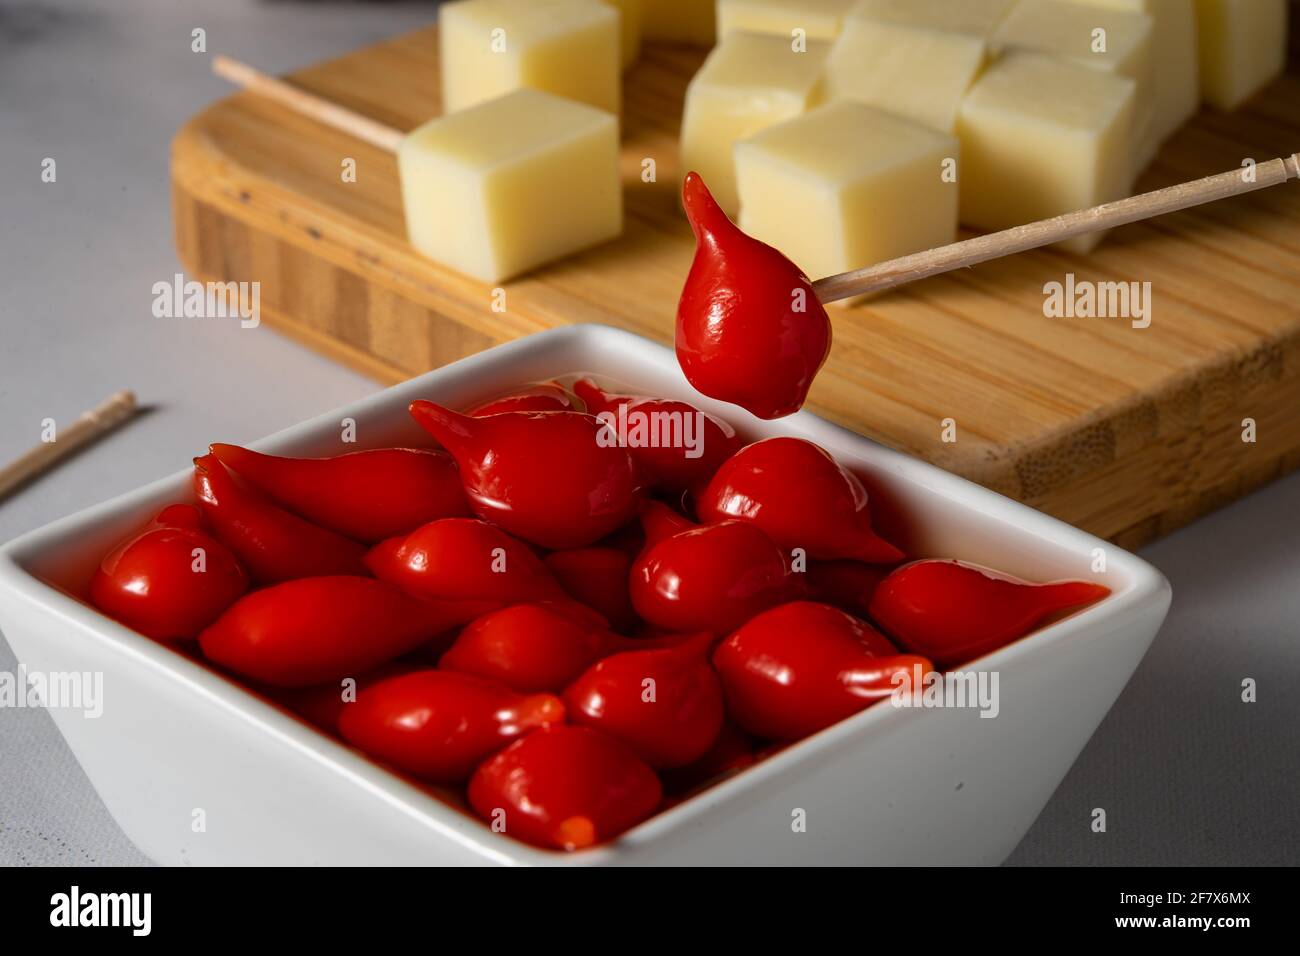 Peruvian spicy sweet drop peppers. Stock Photo